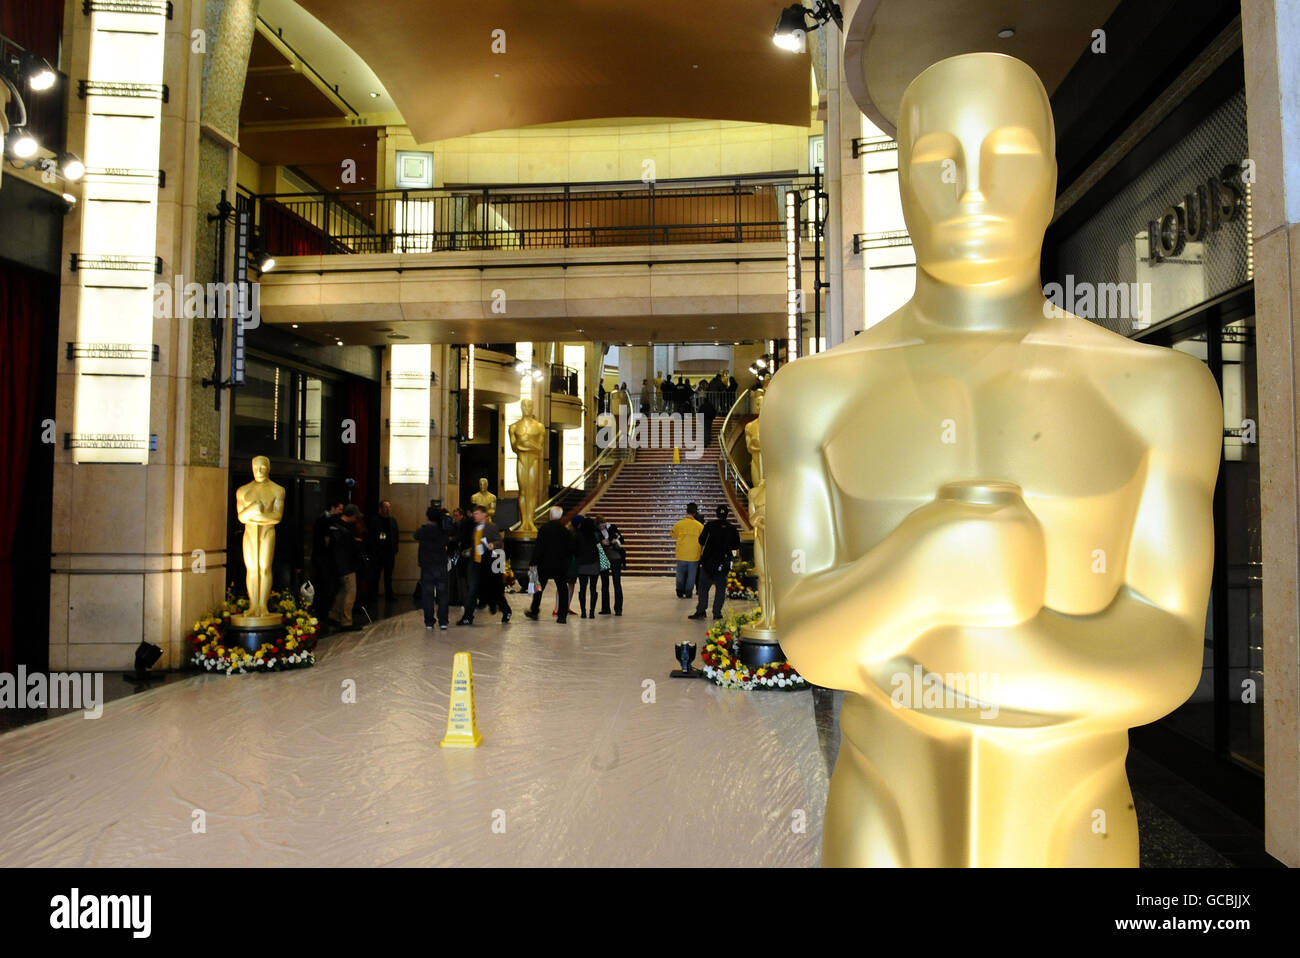 Oscars Preparations - Los Angeles. Preparations inside the Kodak Theatre before the Oscars ceremony in Los Angeles. Stock Photo